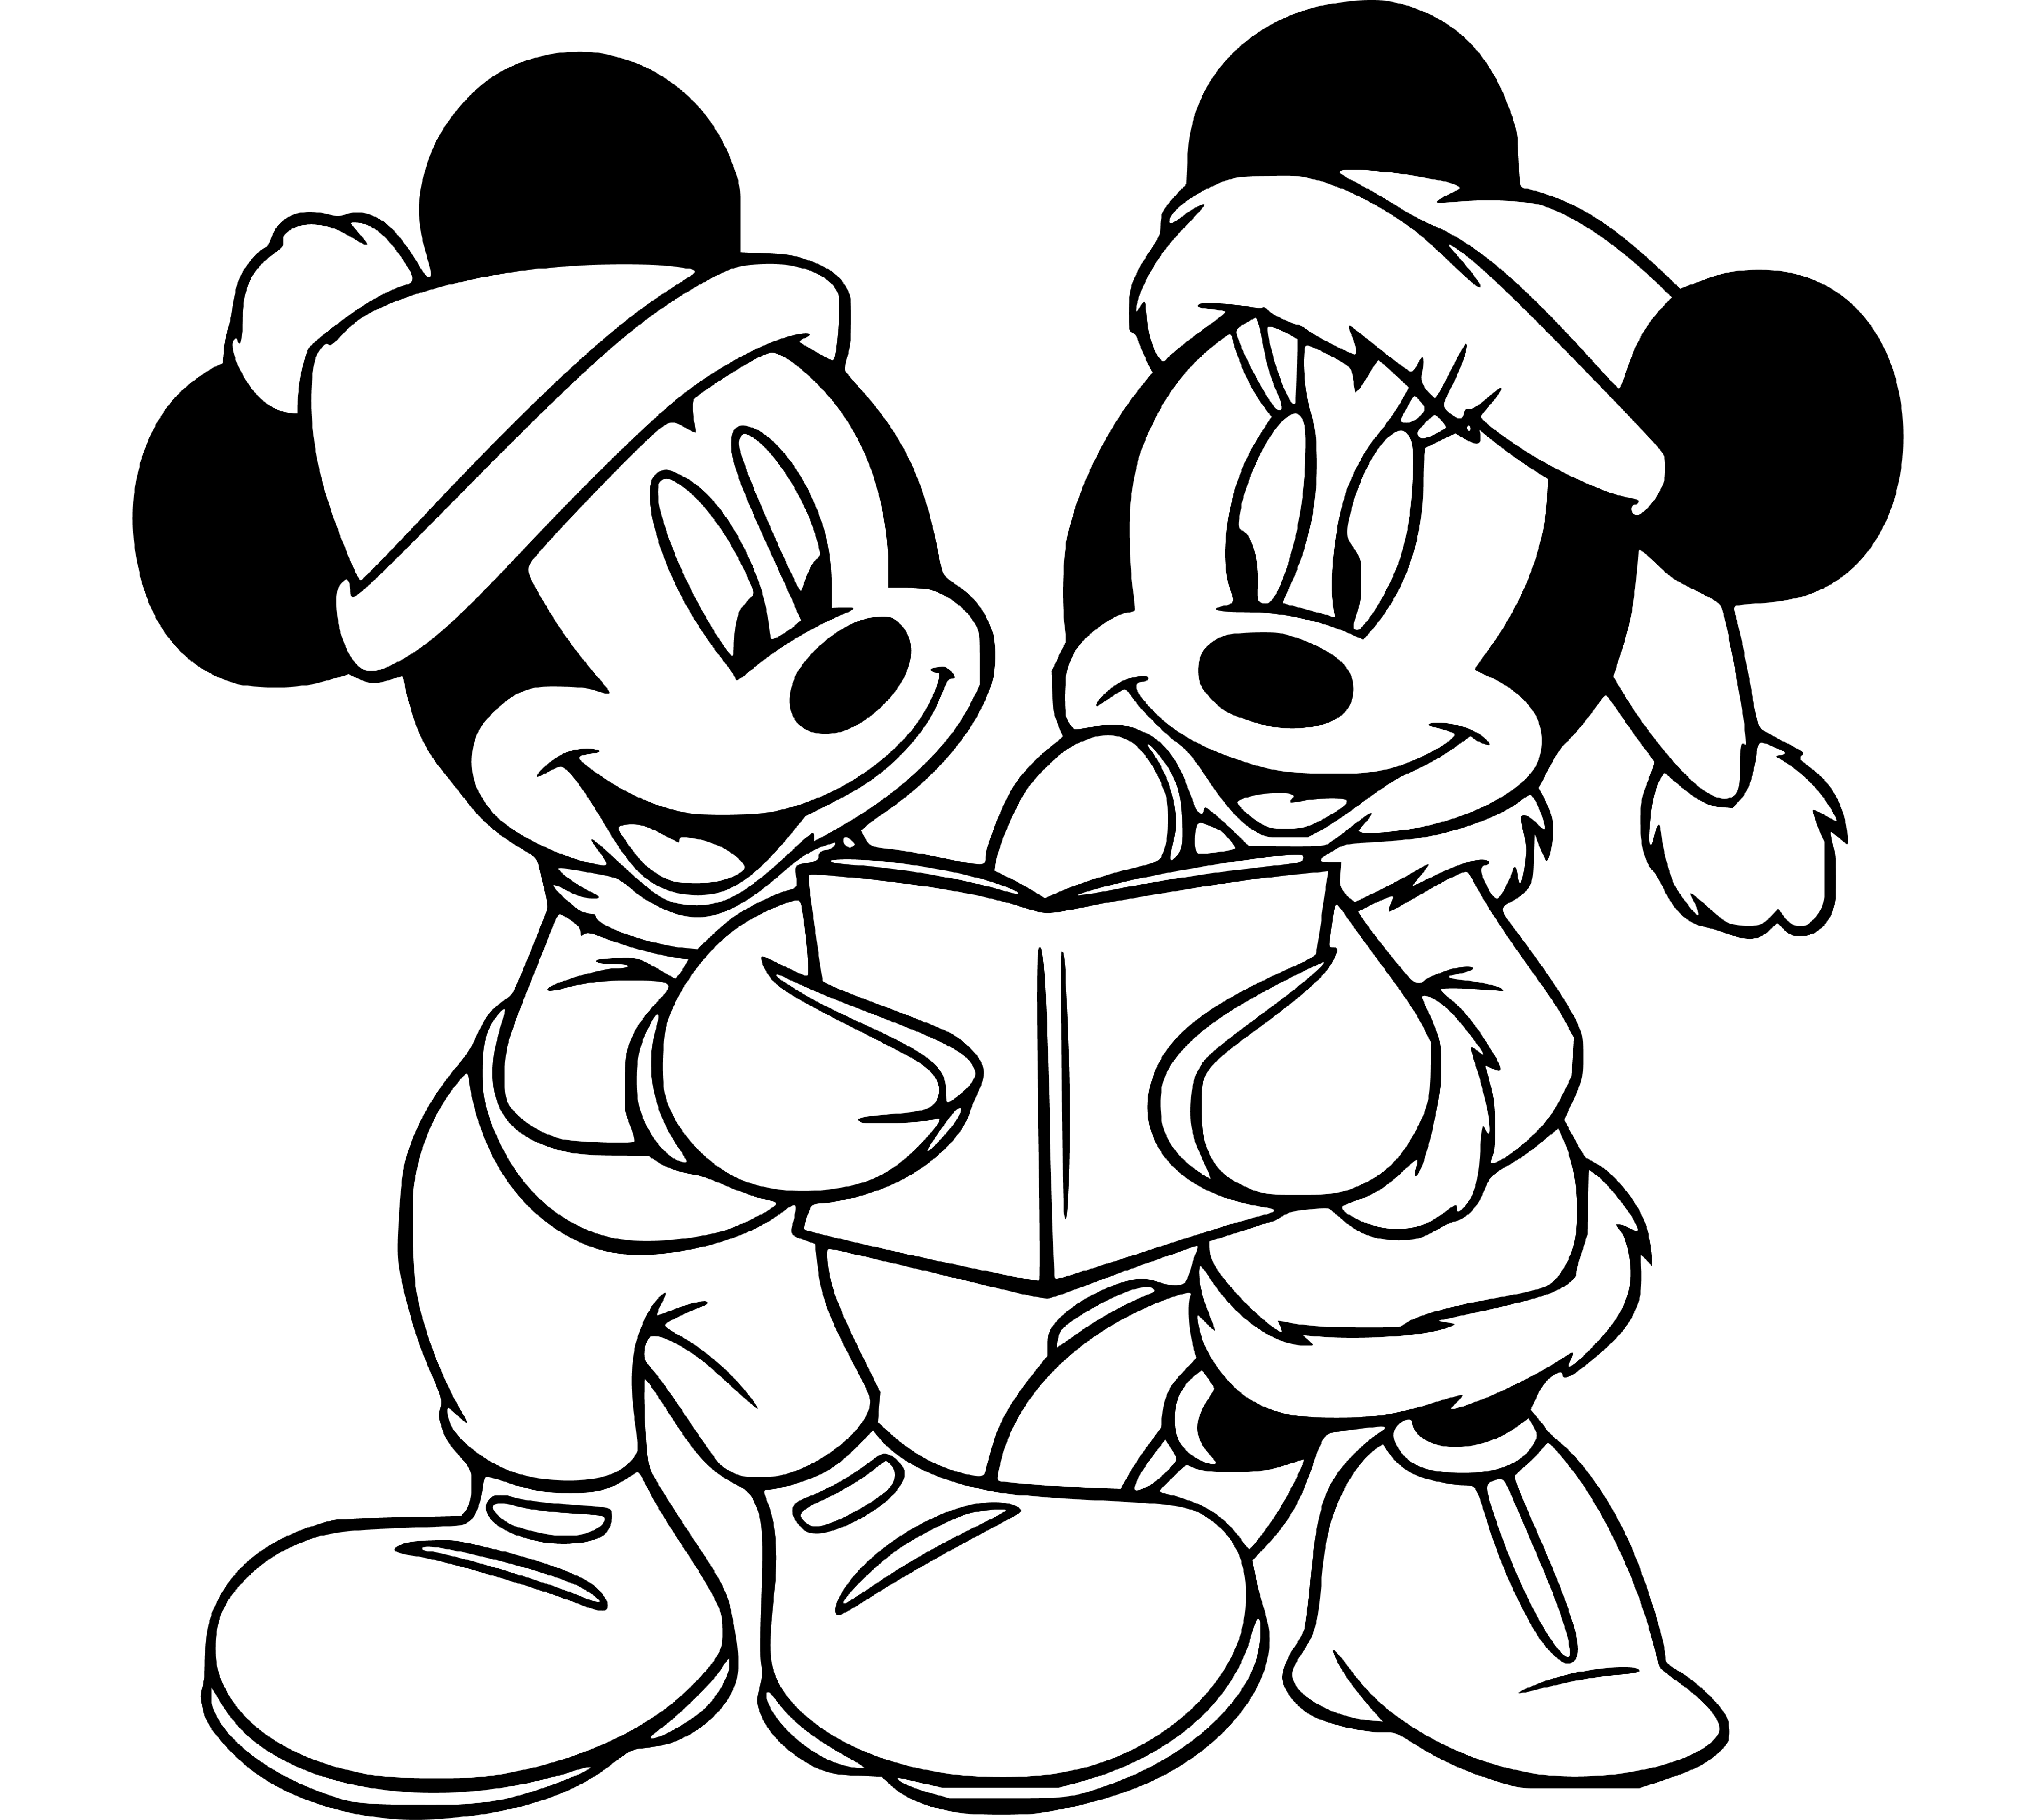 Printable Mickey and Minnie reading bible Coloring Page for kids.